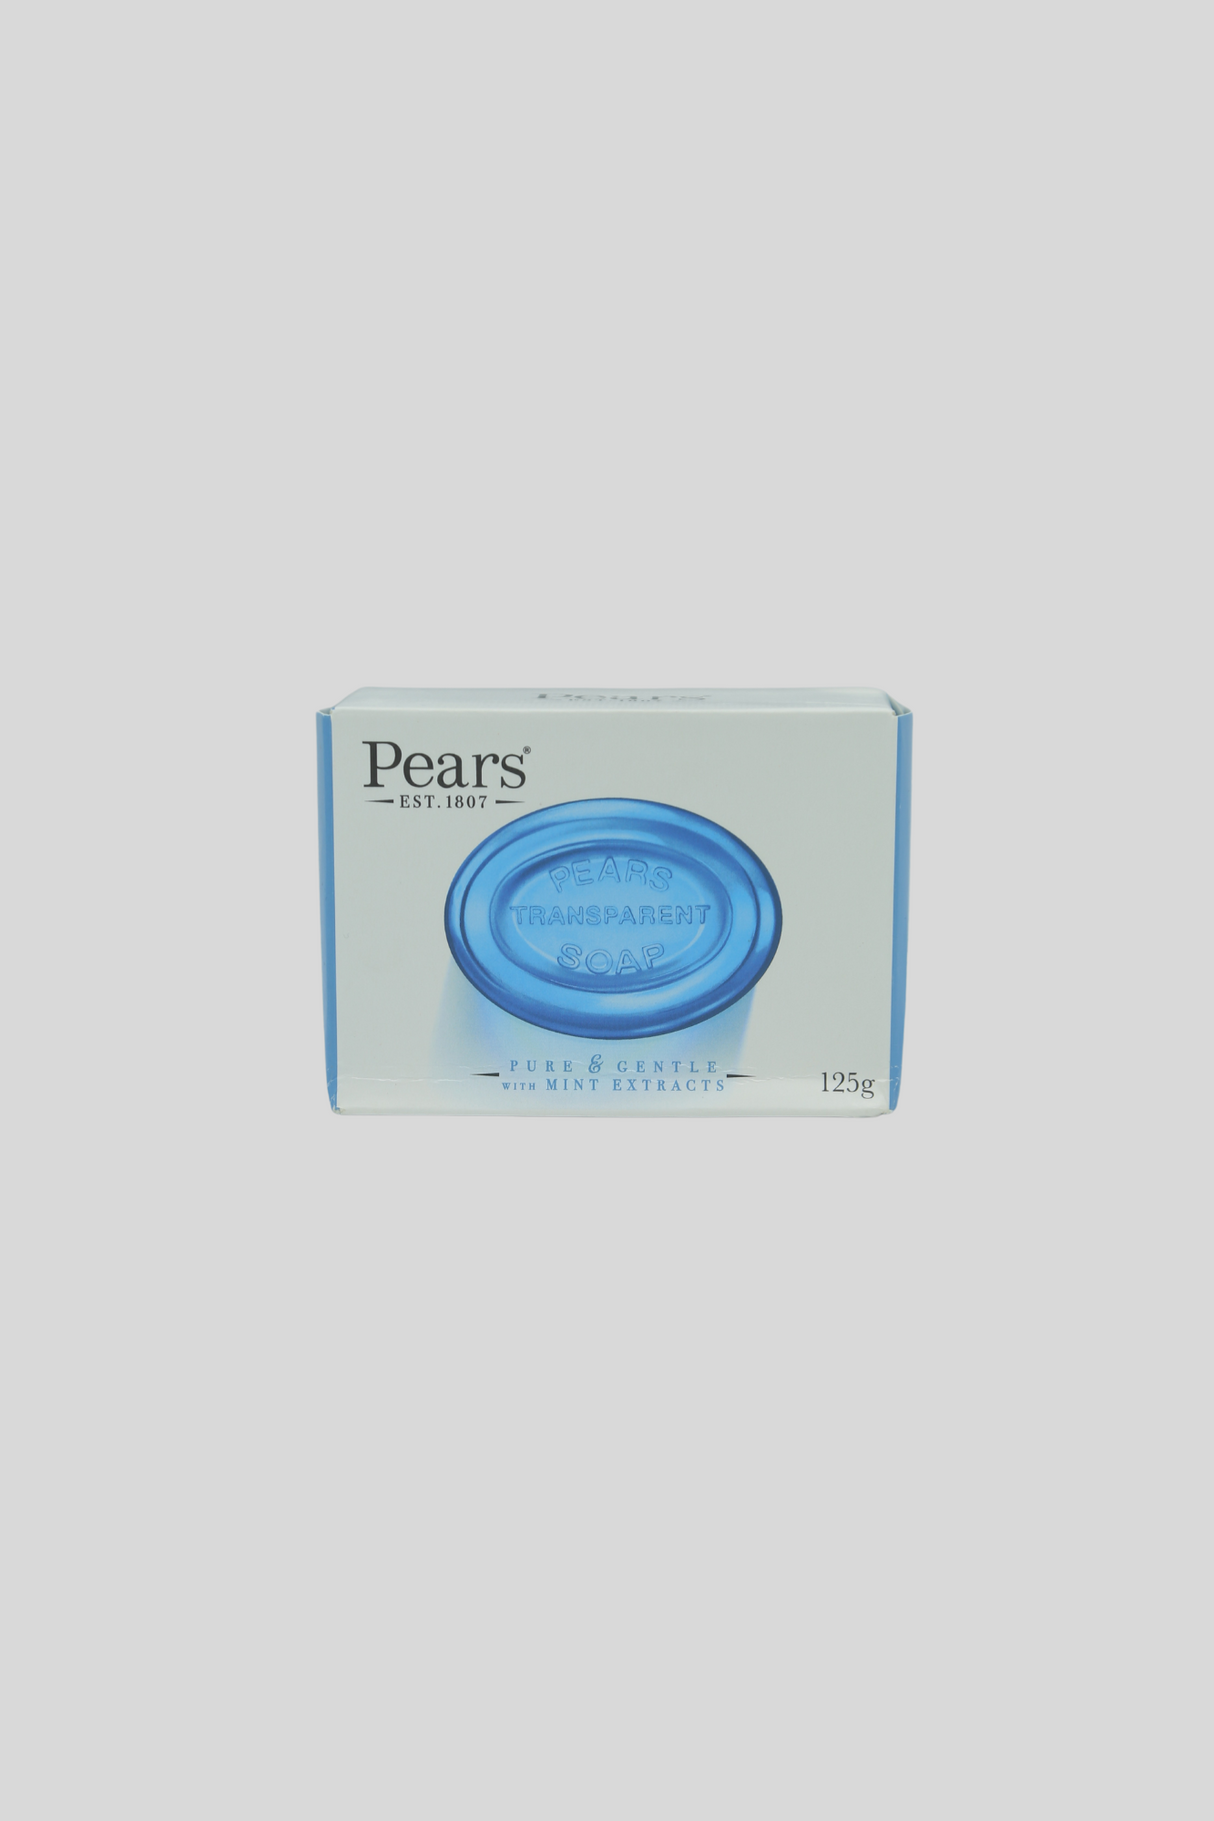 pears soap mint extracts 125g